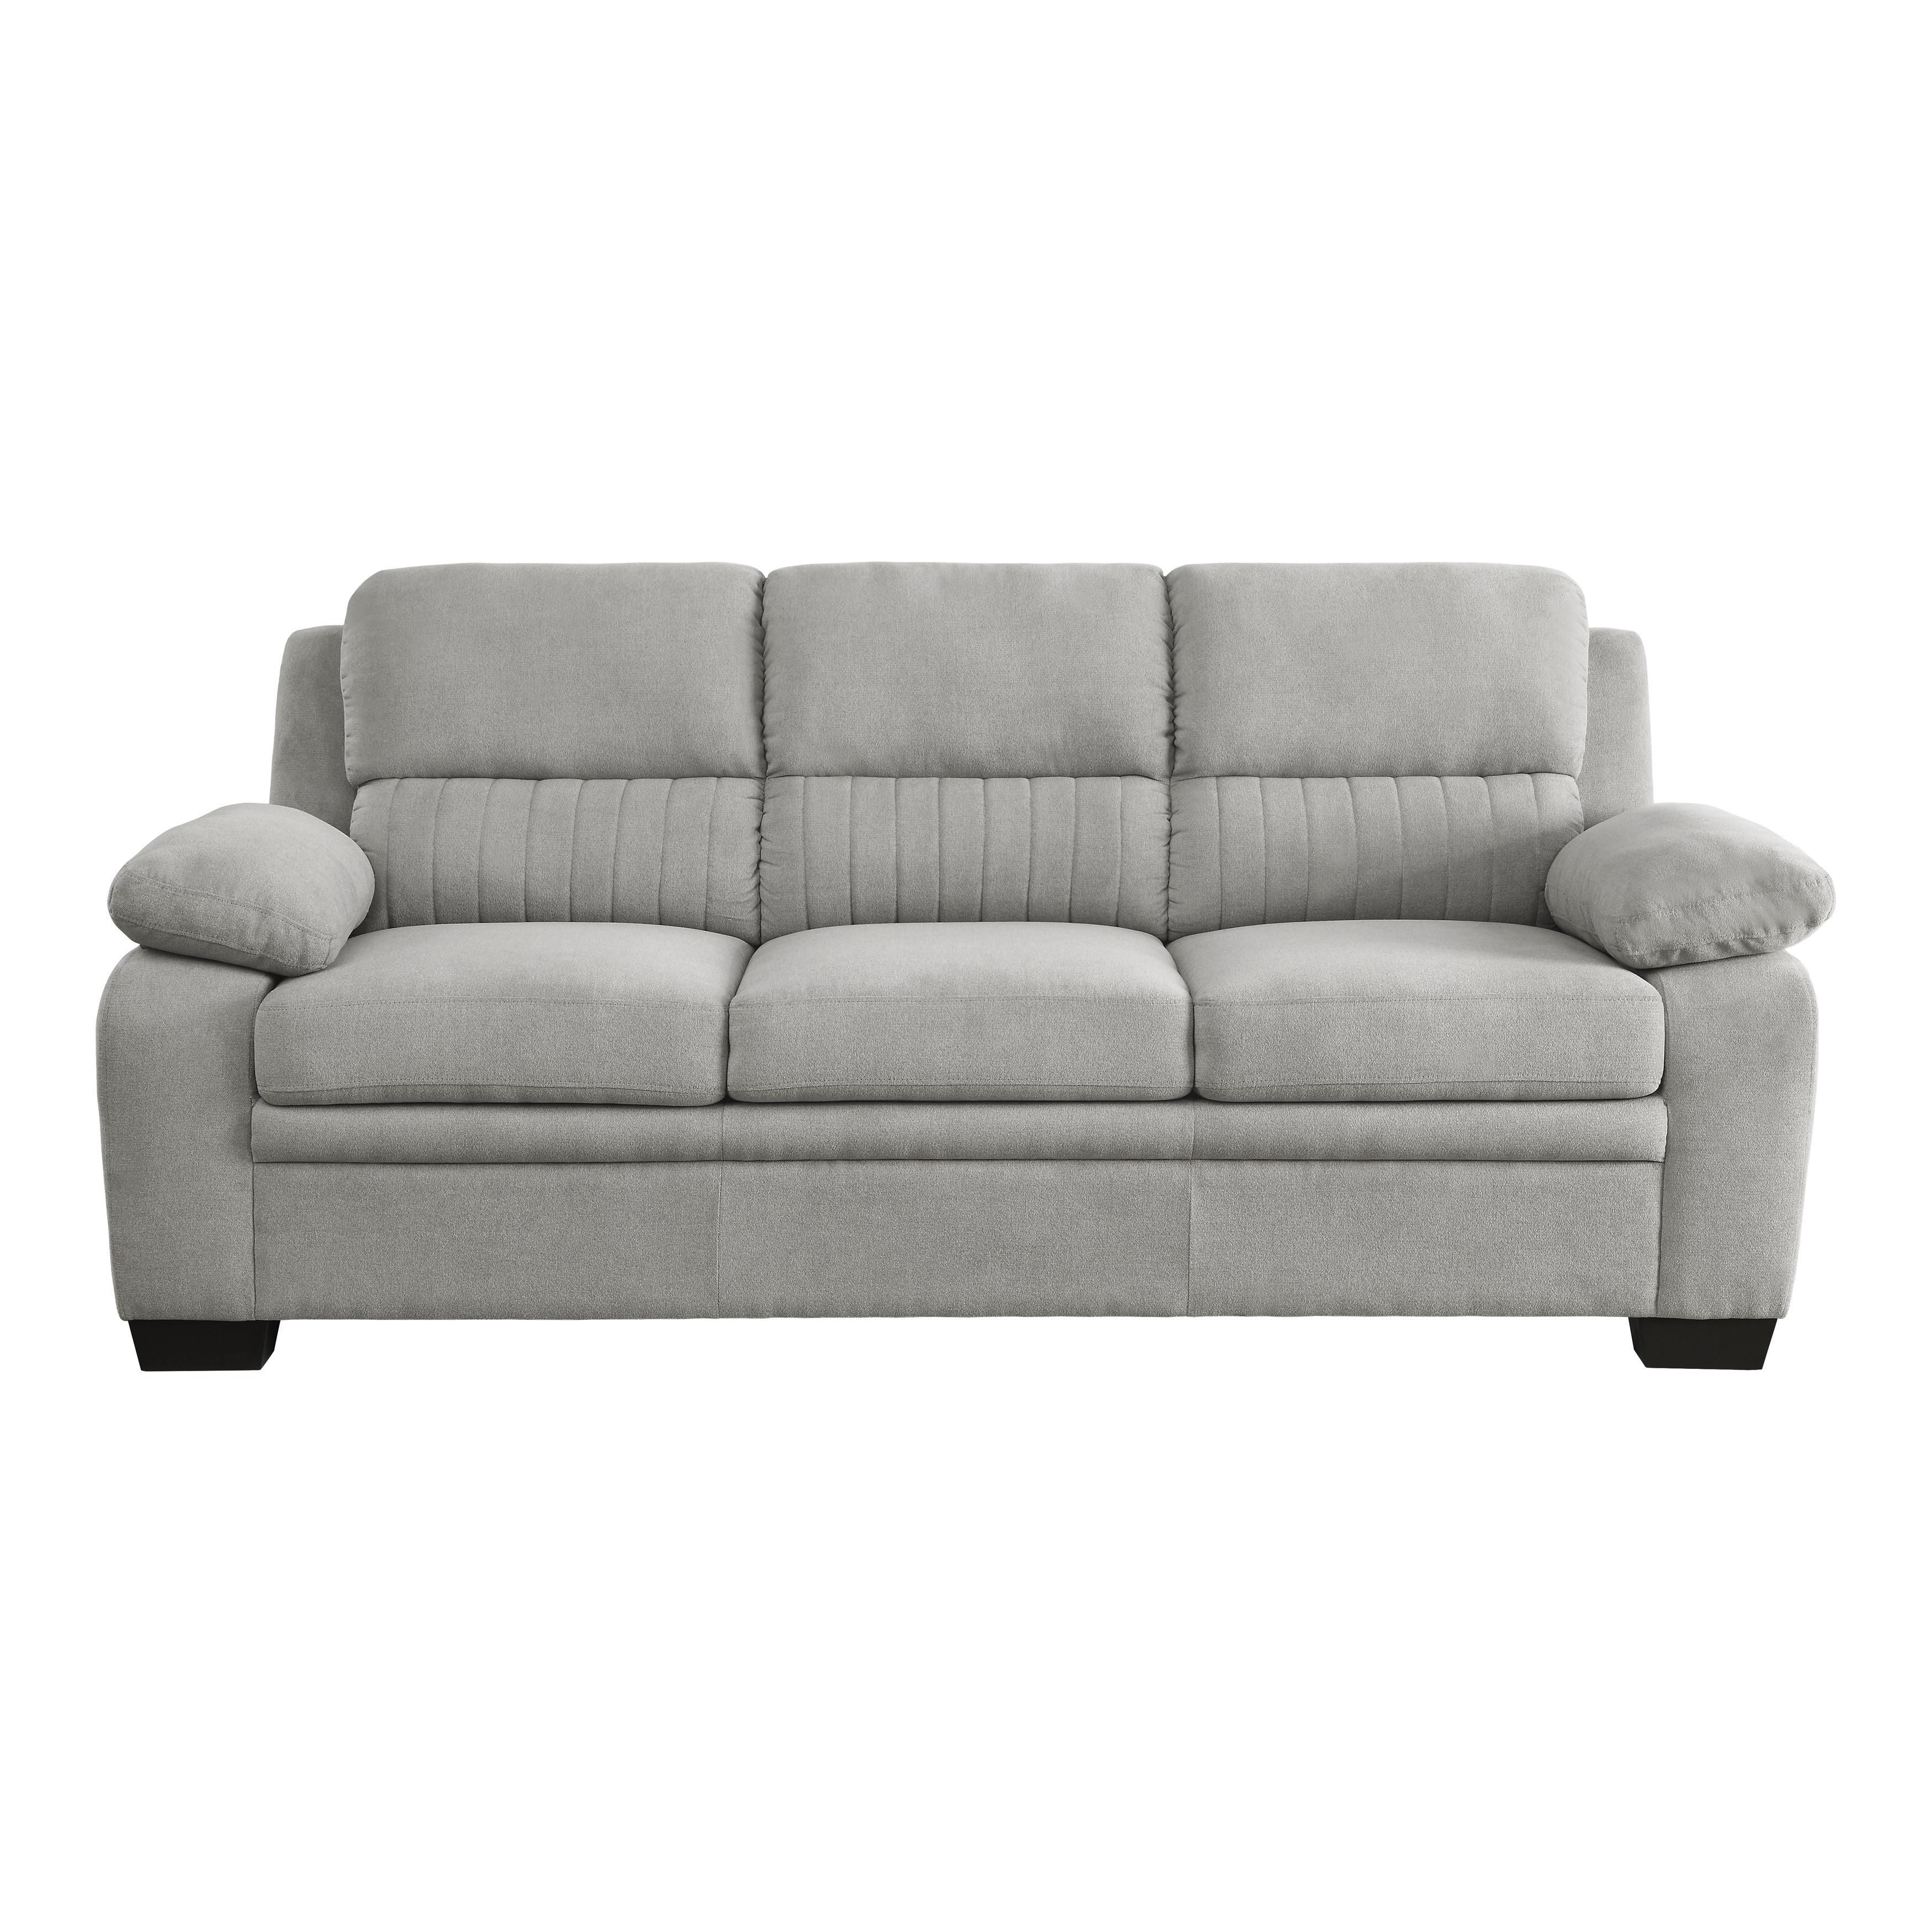 Modern Sofa 9333GY-3 Holleman 9333GY-3 in Gray 